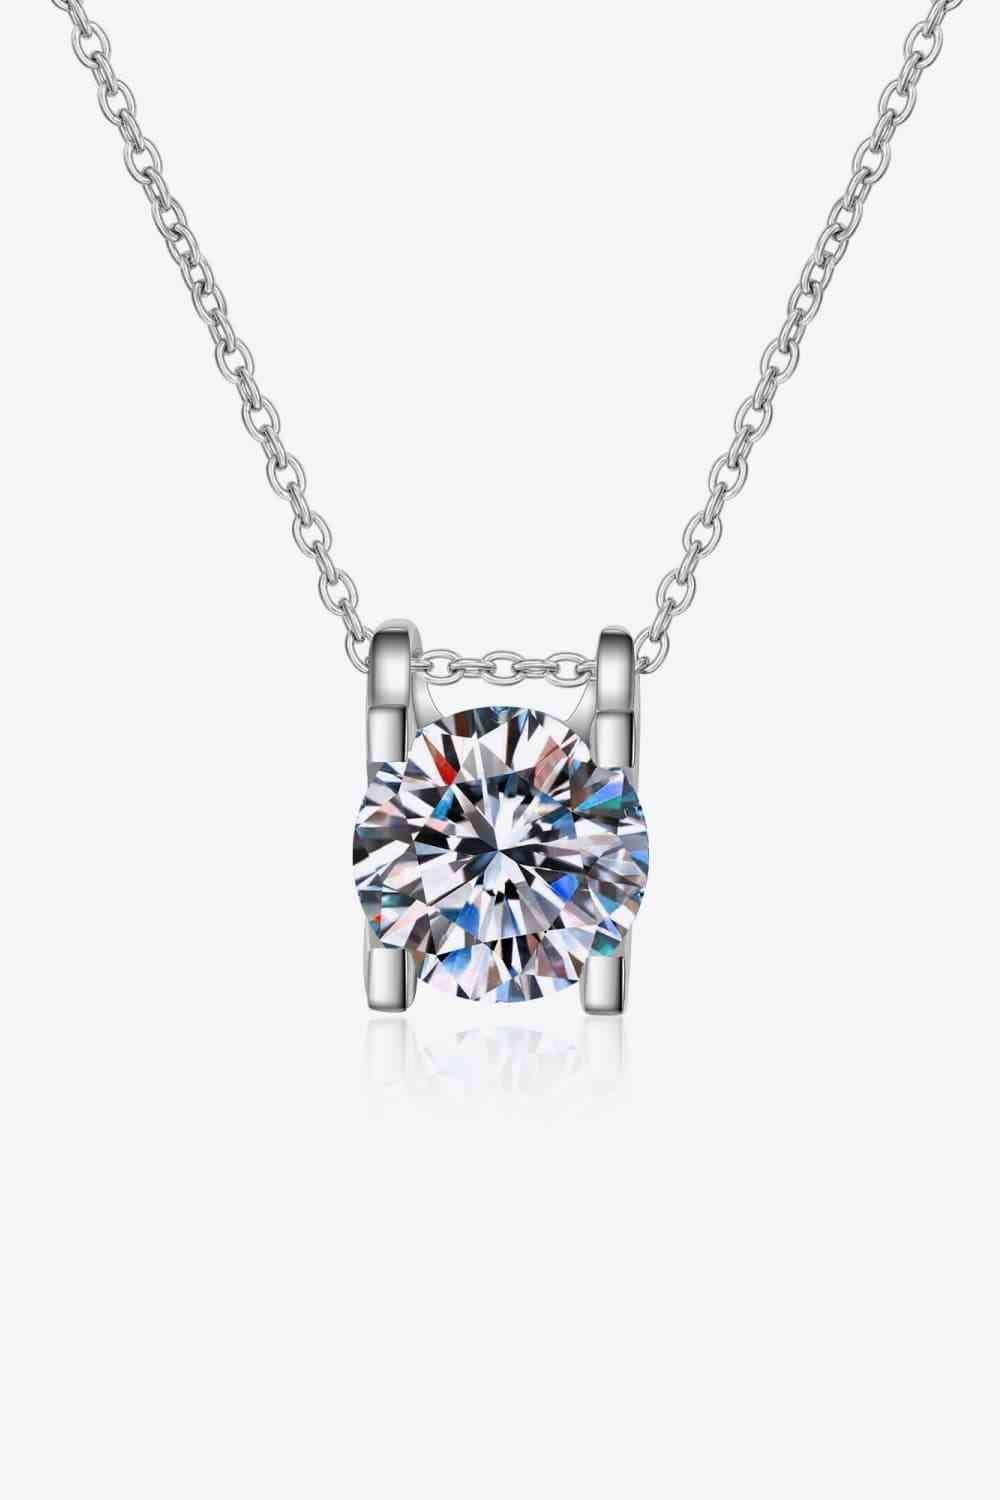 a necklace with a cubic stone in the center